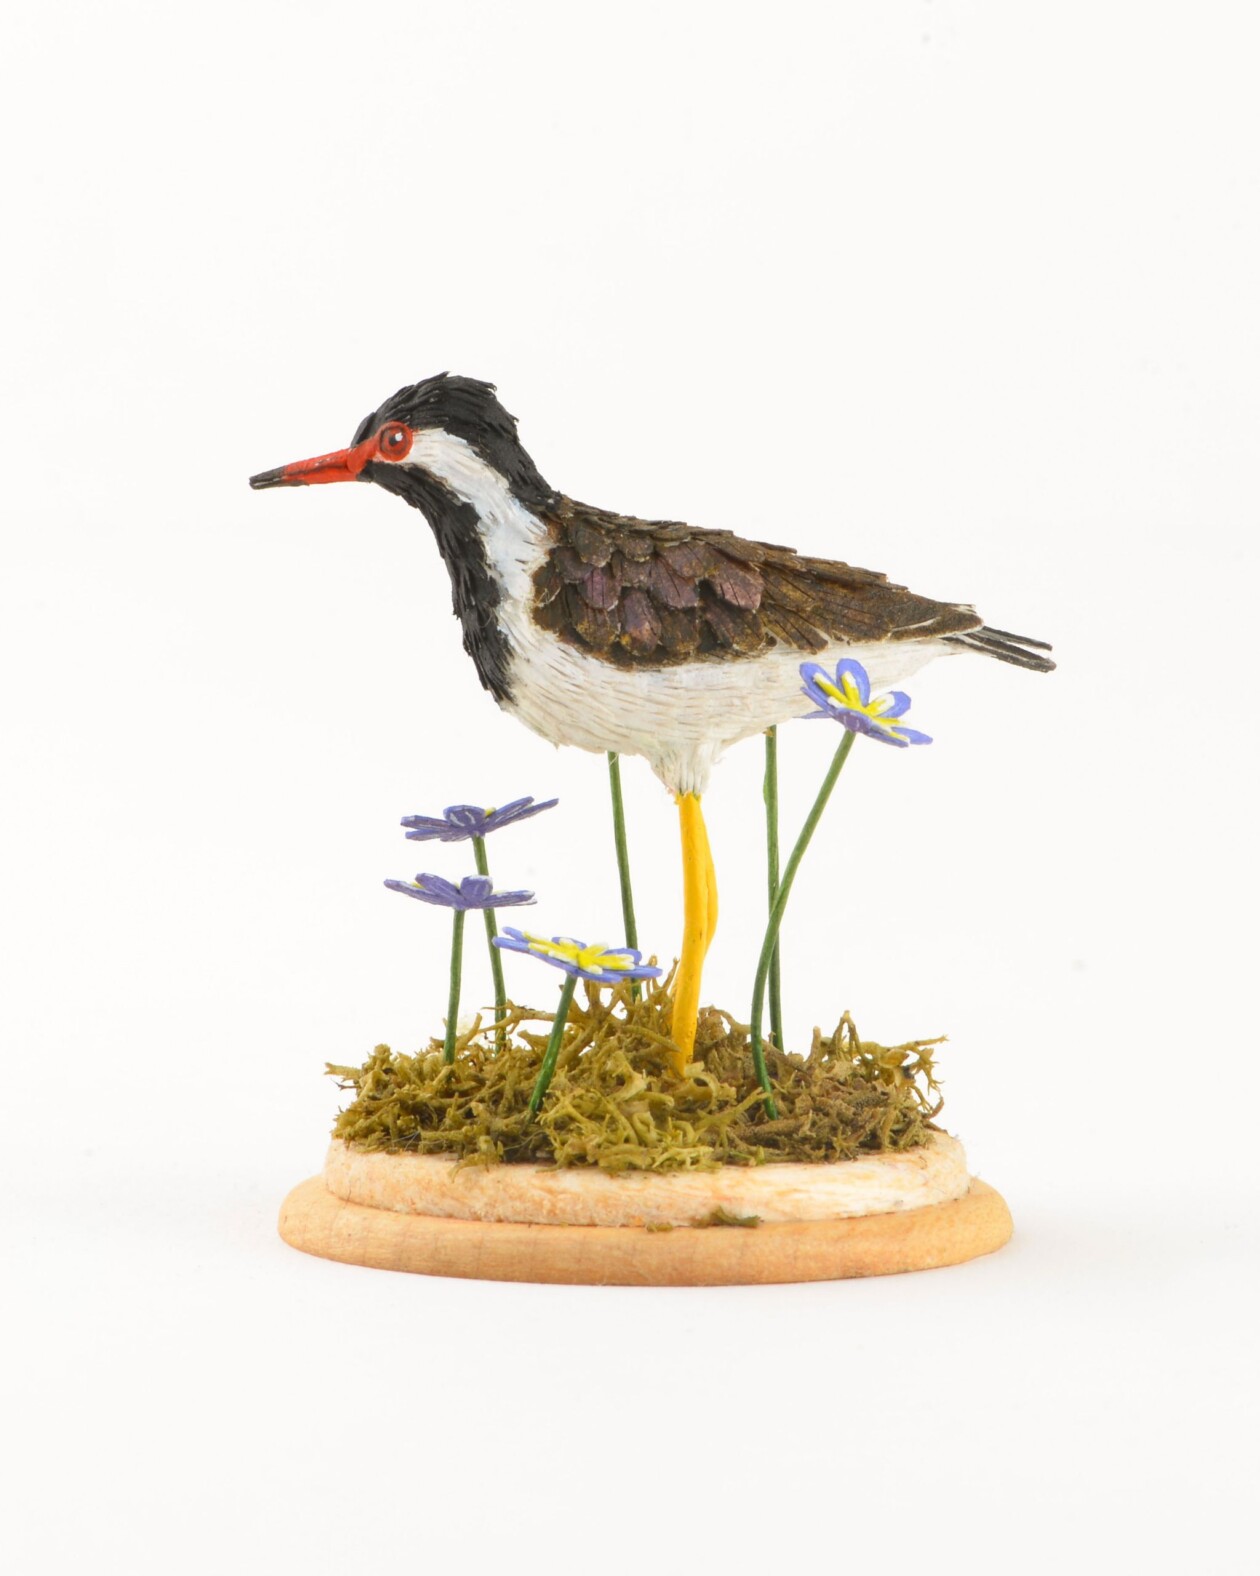 Miniature Bird Paper Sculptures With Whimsical Details By Nayan And Venus (12)